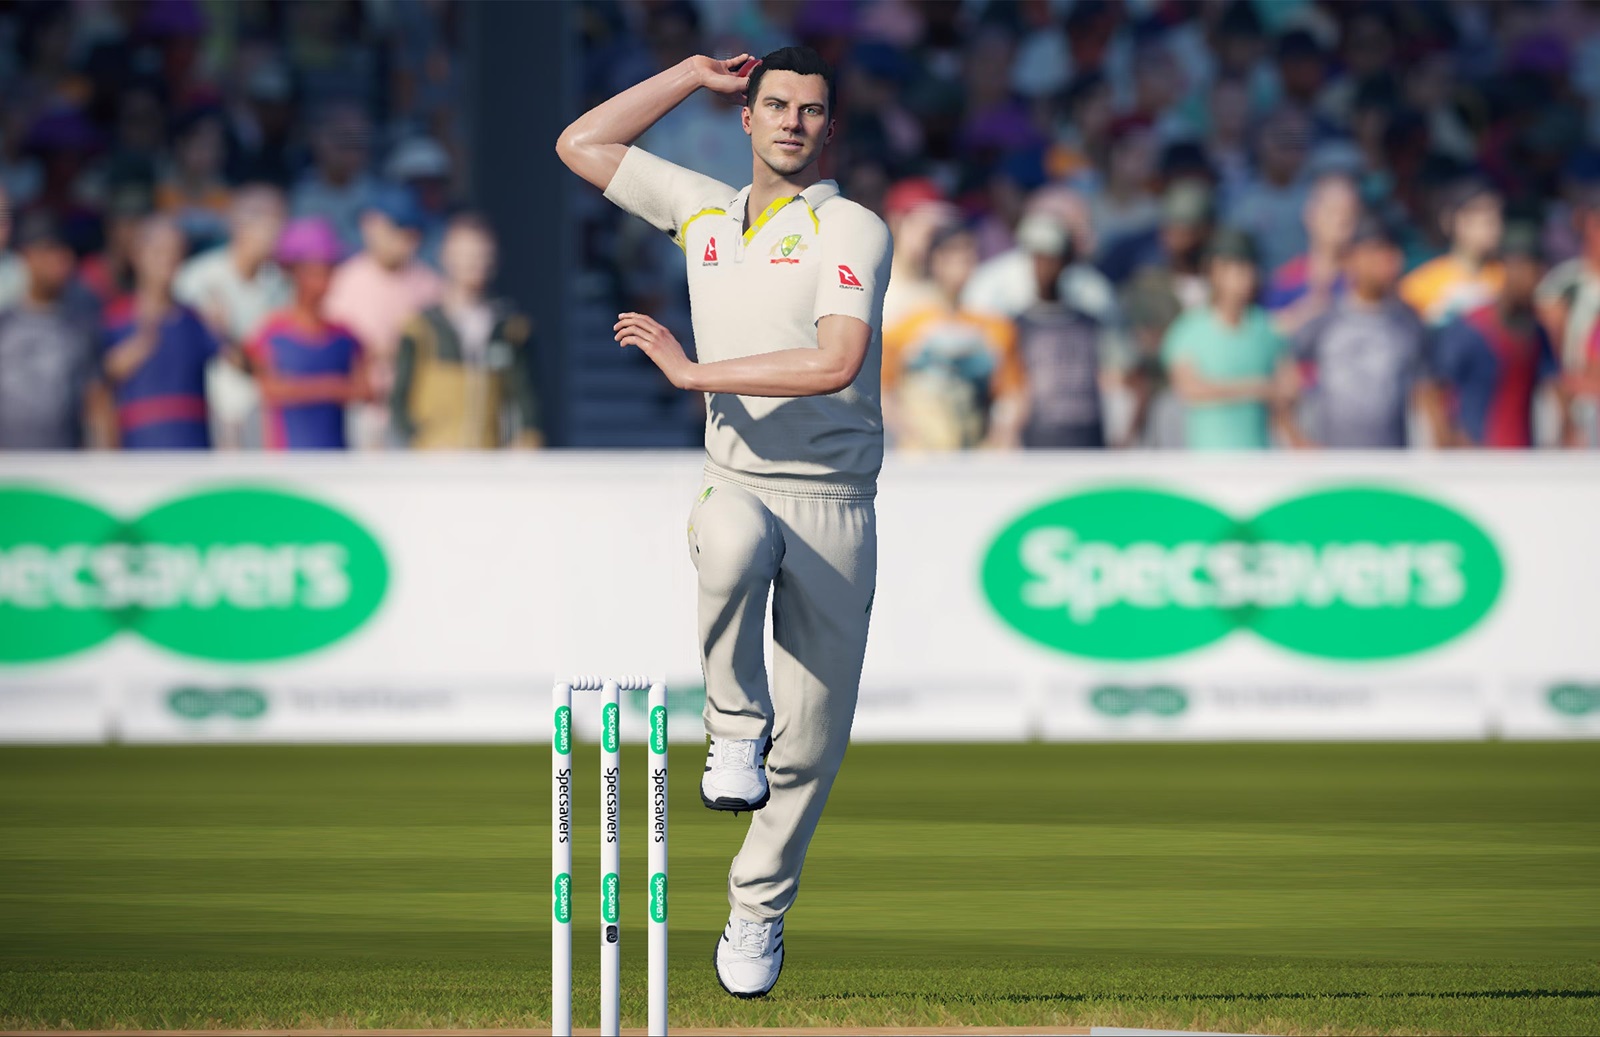 Ashes Cricket Version Full Game Free Download